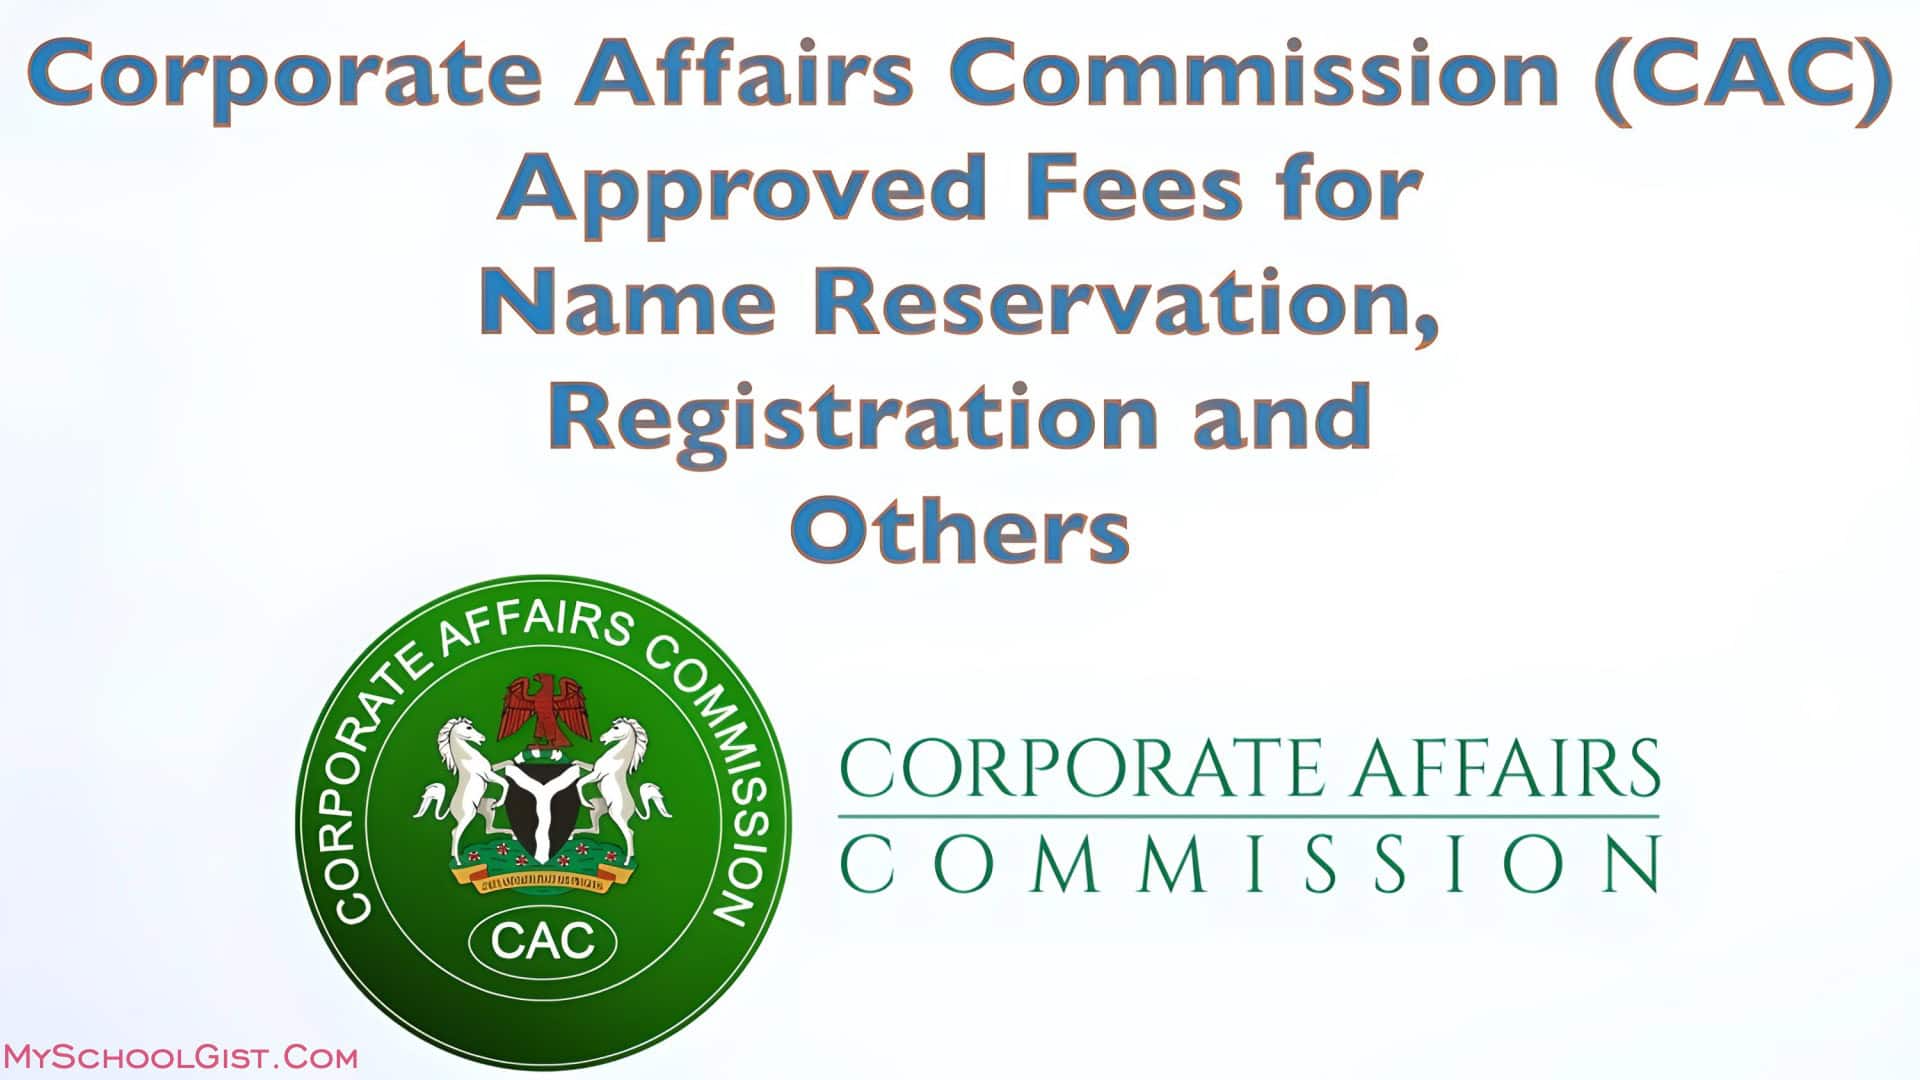 CAC Fees for Business Name Services in Nigeria